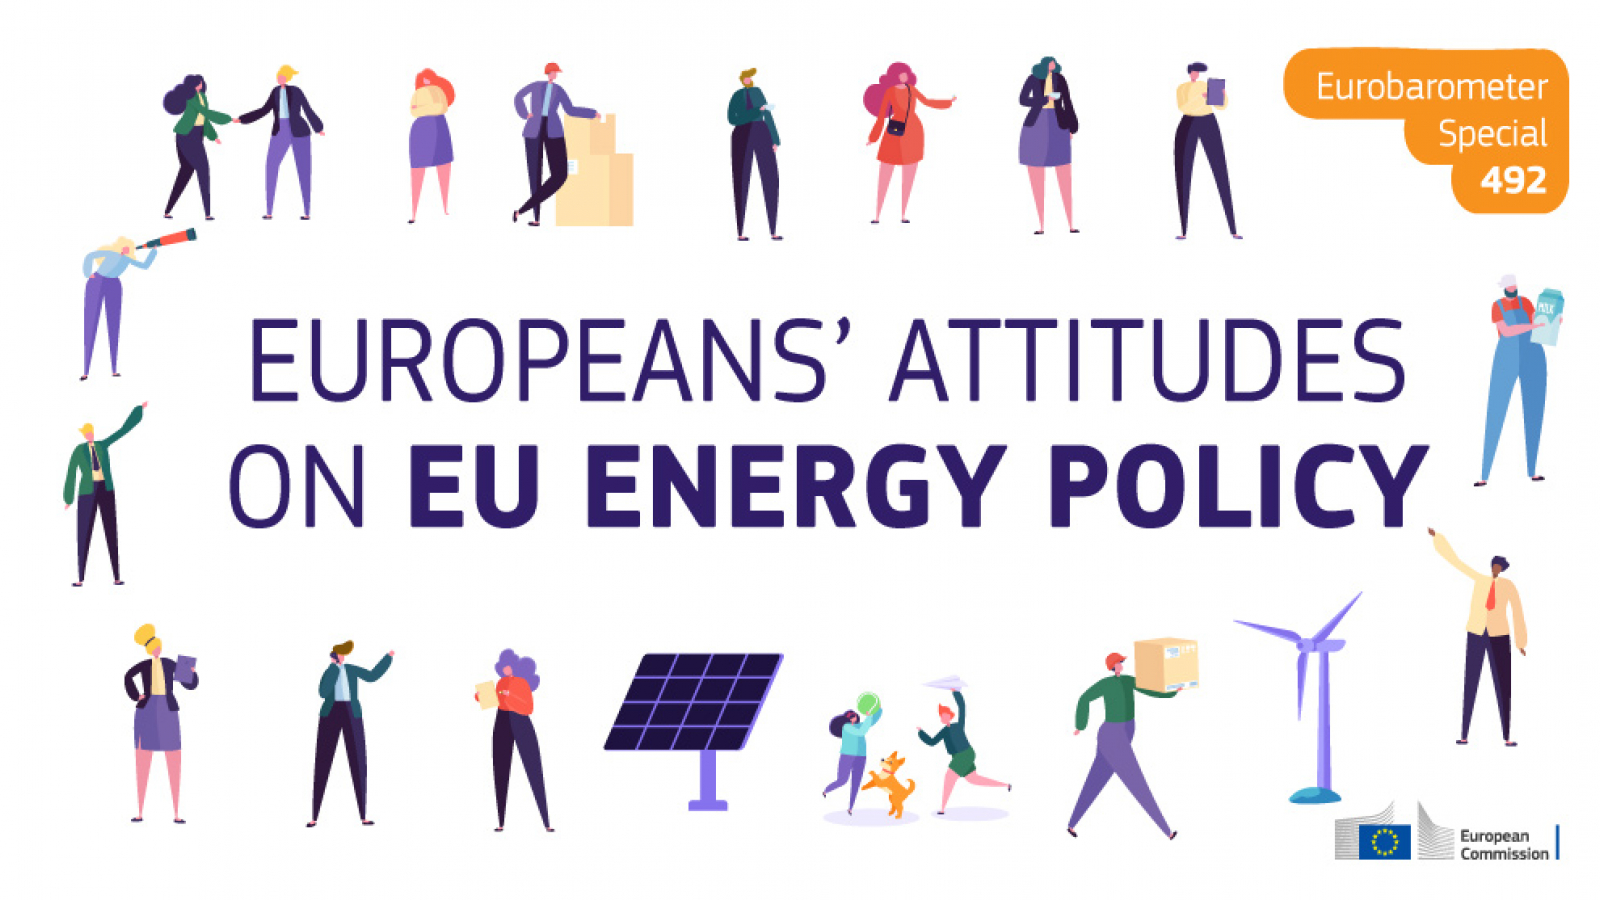 Survey shows majority of Europeans agree that the EU should ensure secure, clean, and affordable energy 